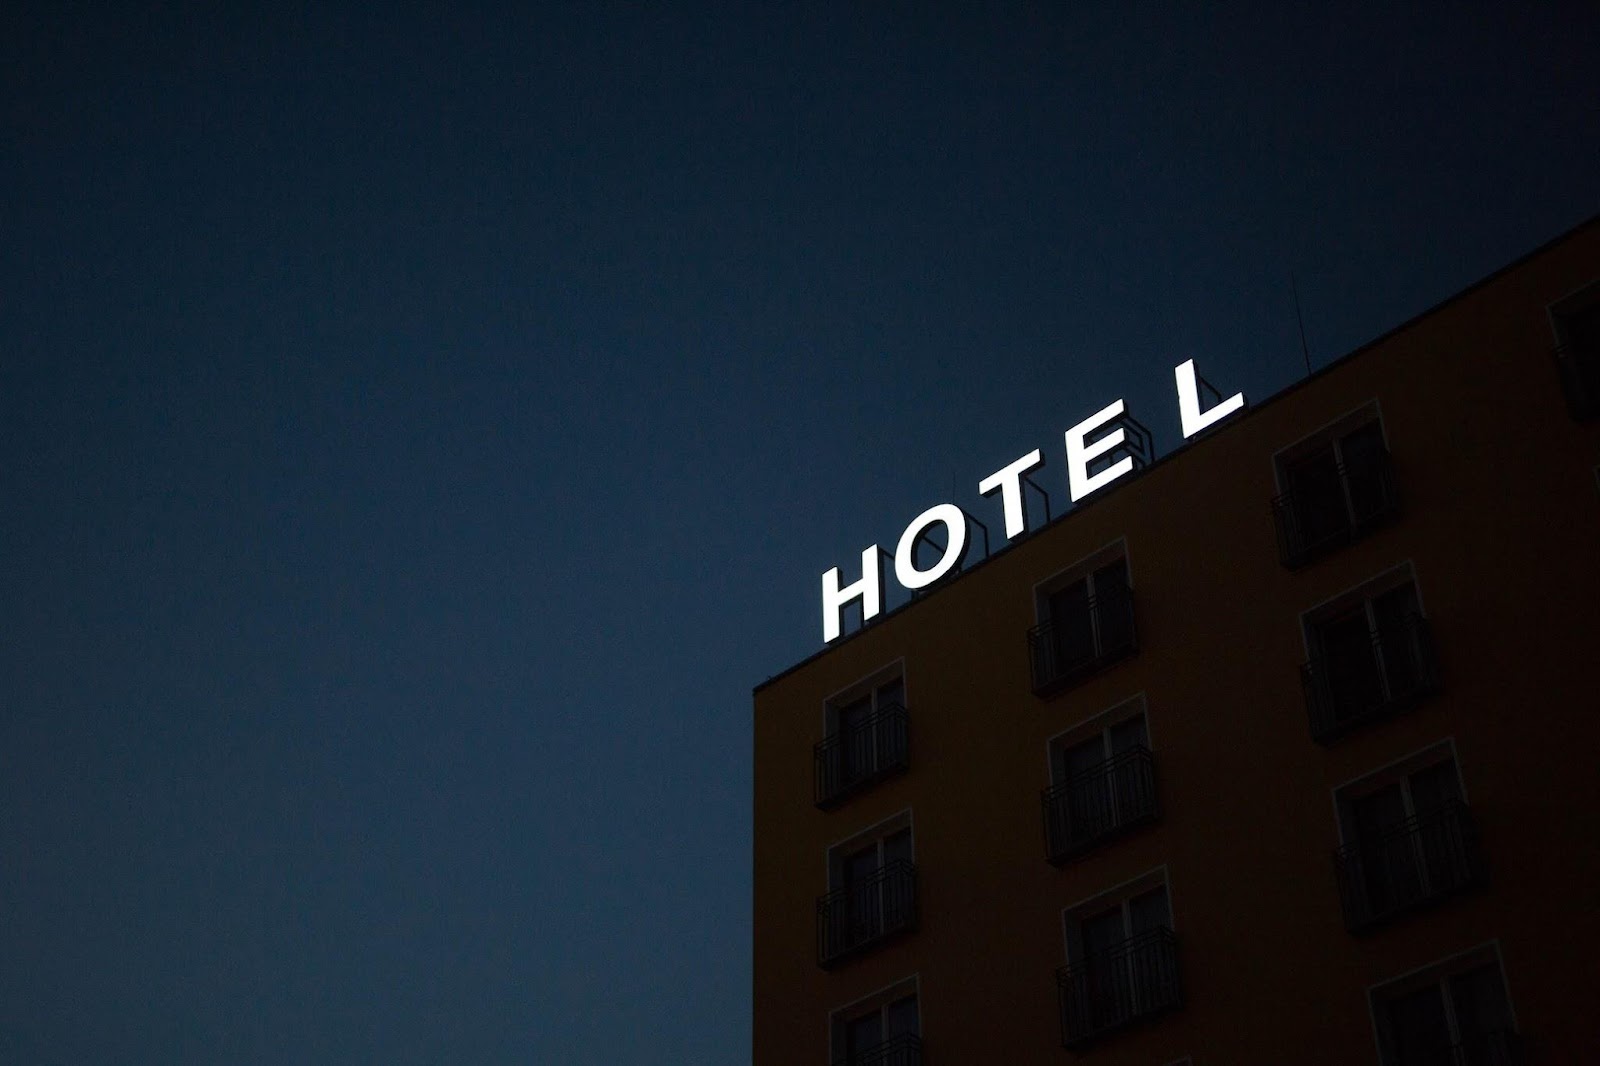 Important Things You Should Consider When Looking For A Hotel